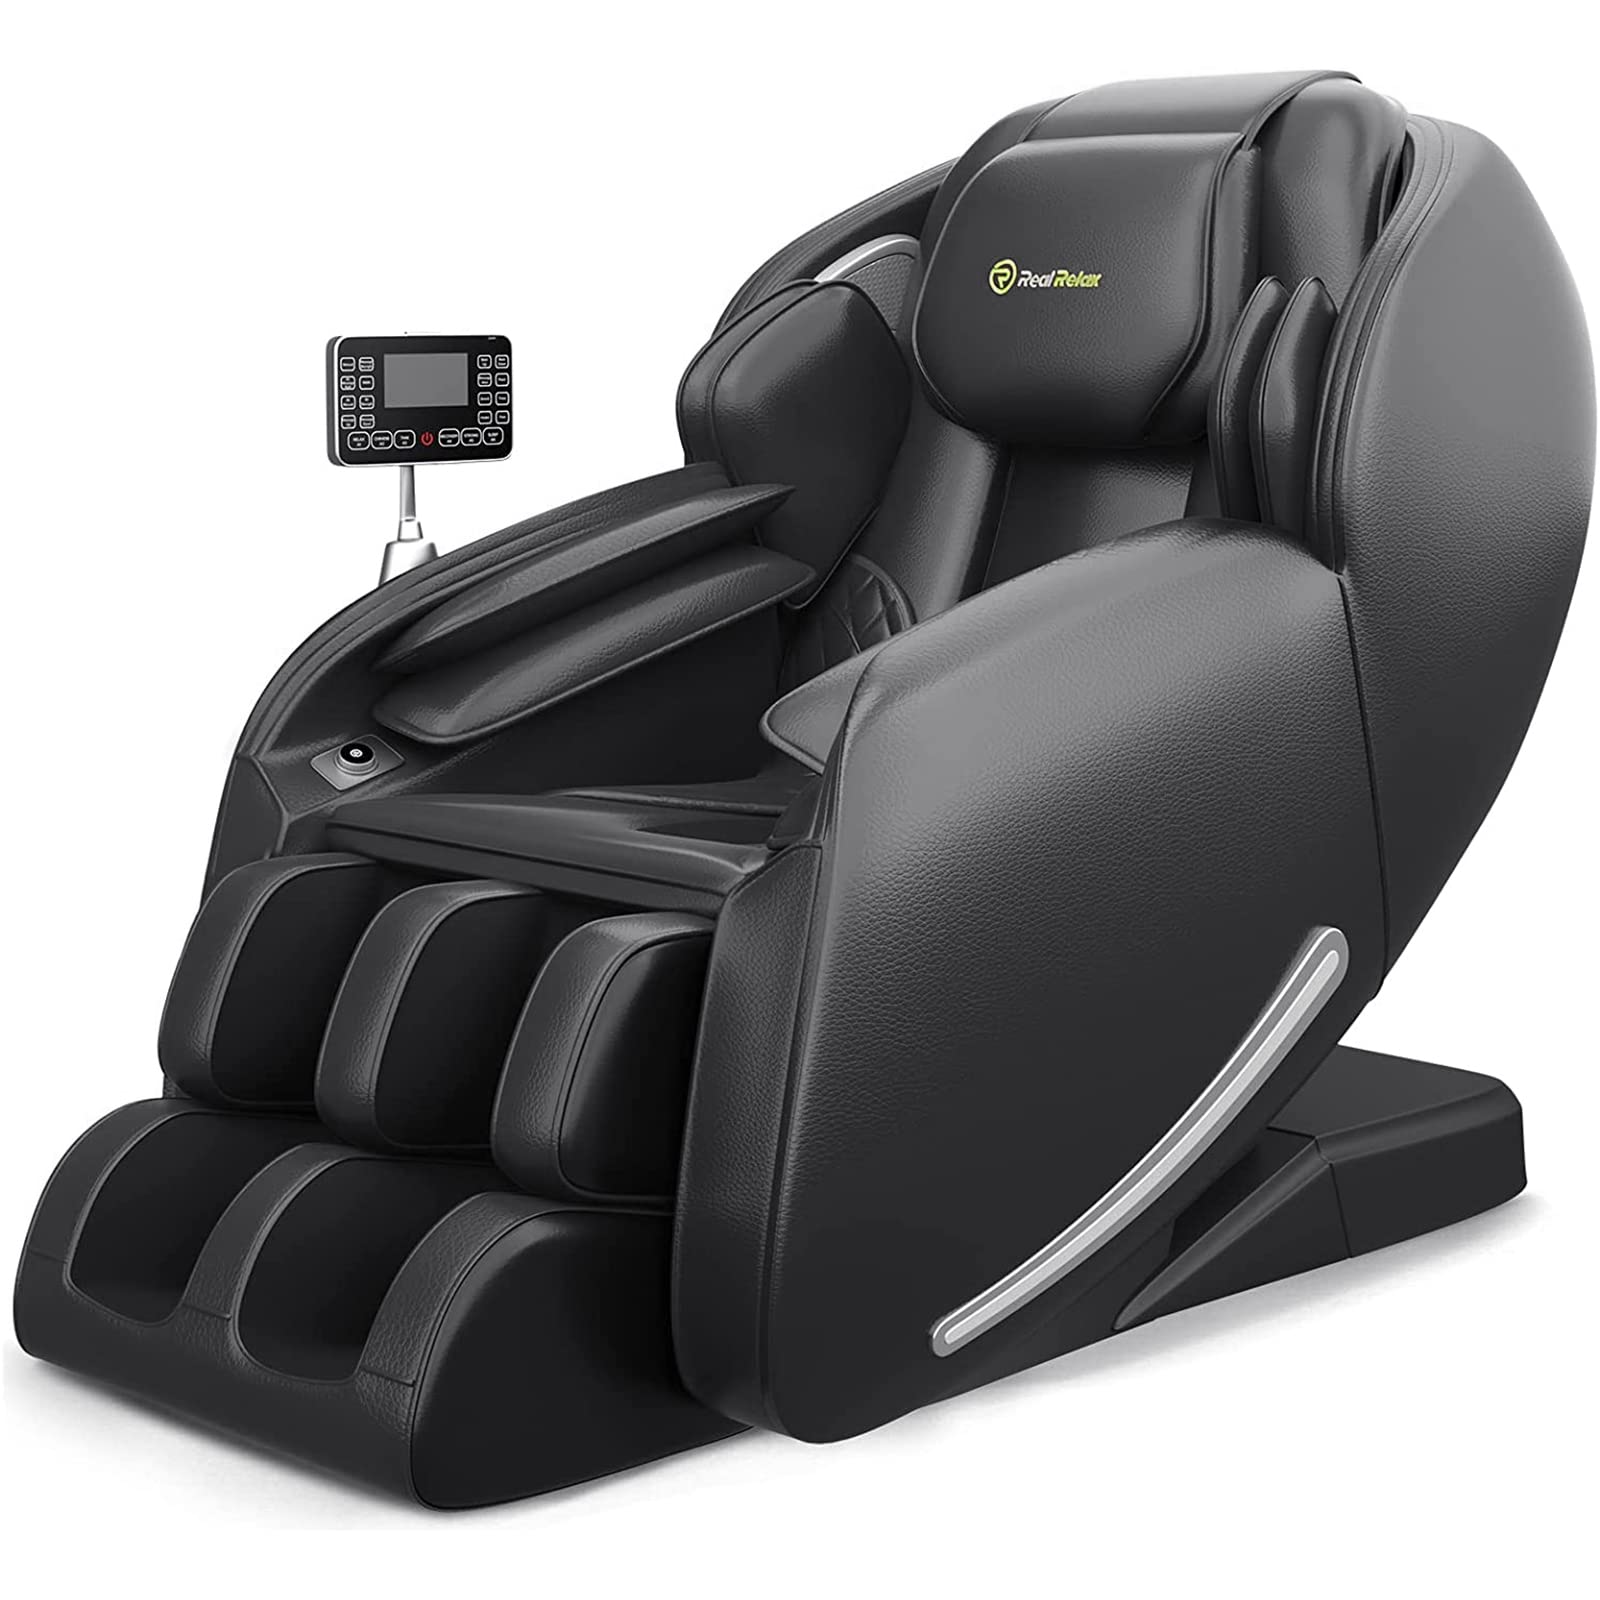 Real Relax Massage Chair Favor-06 Massage Chair Black Refurbished